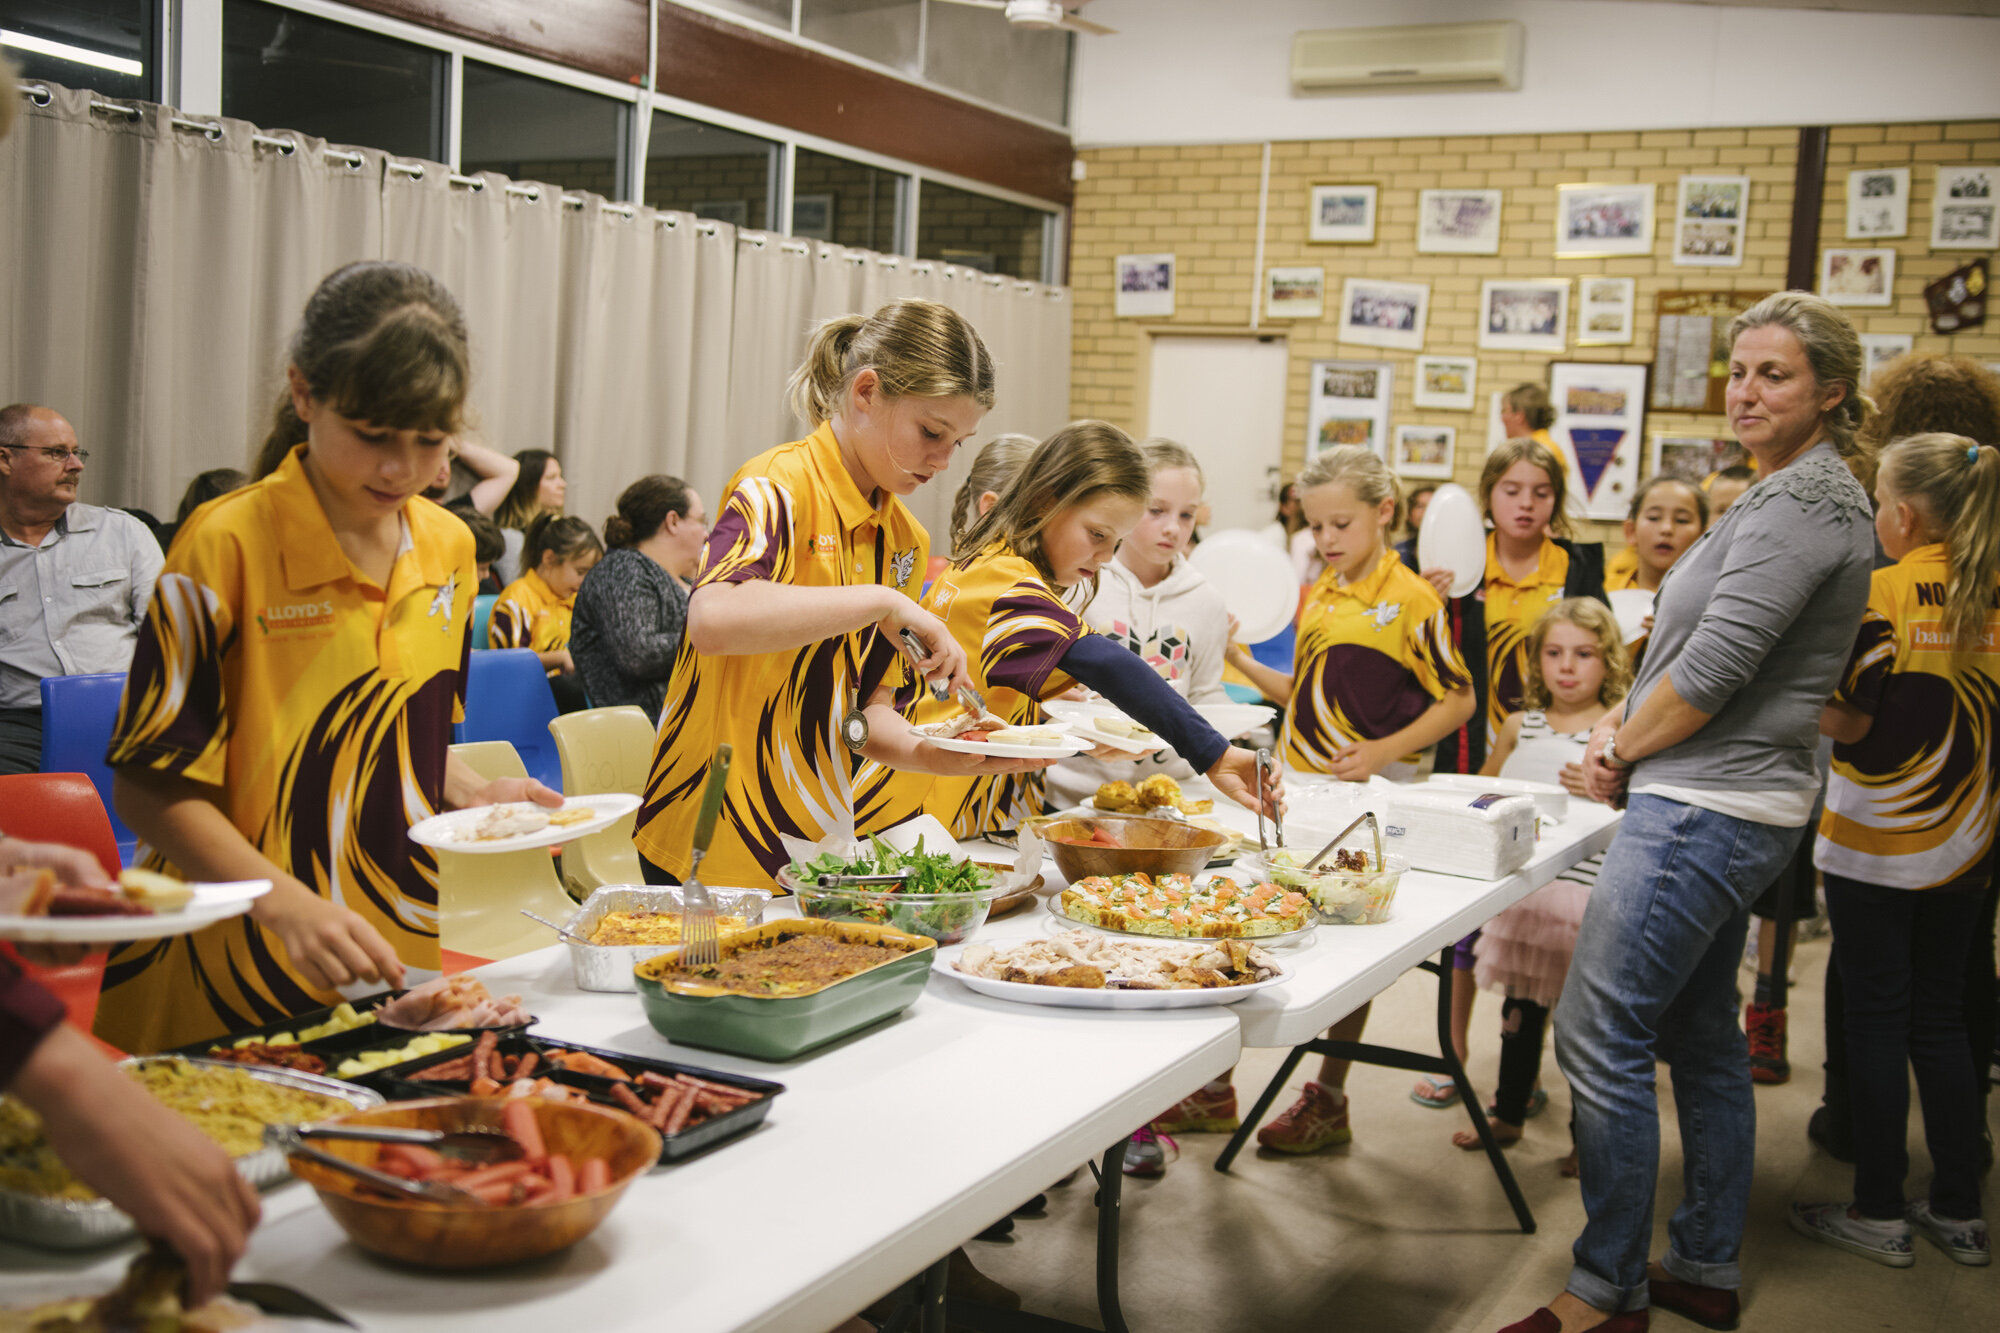 Angie-Roe-Photography-Event-Perth-Northam-Wheatbelt-Country-Rural (30).jpg